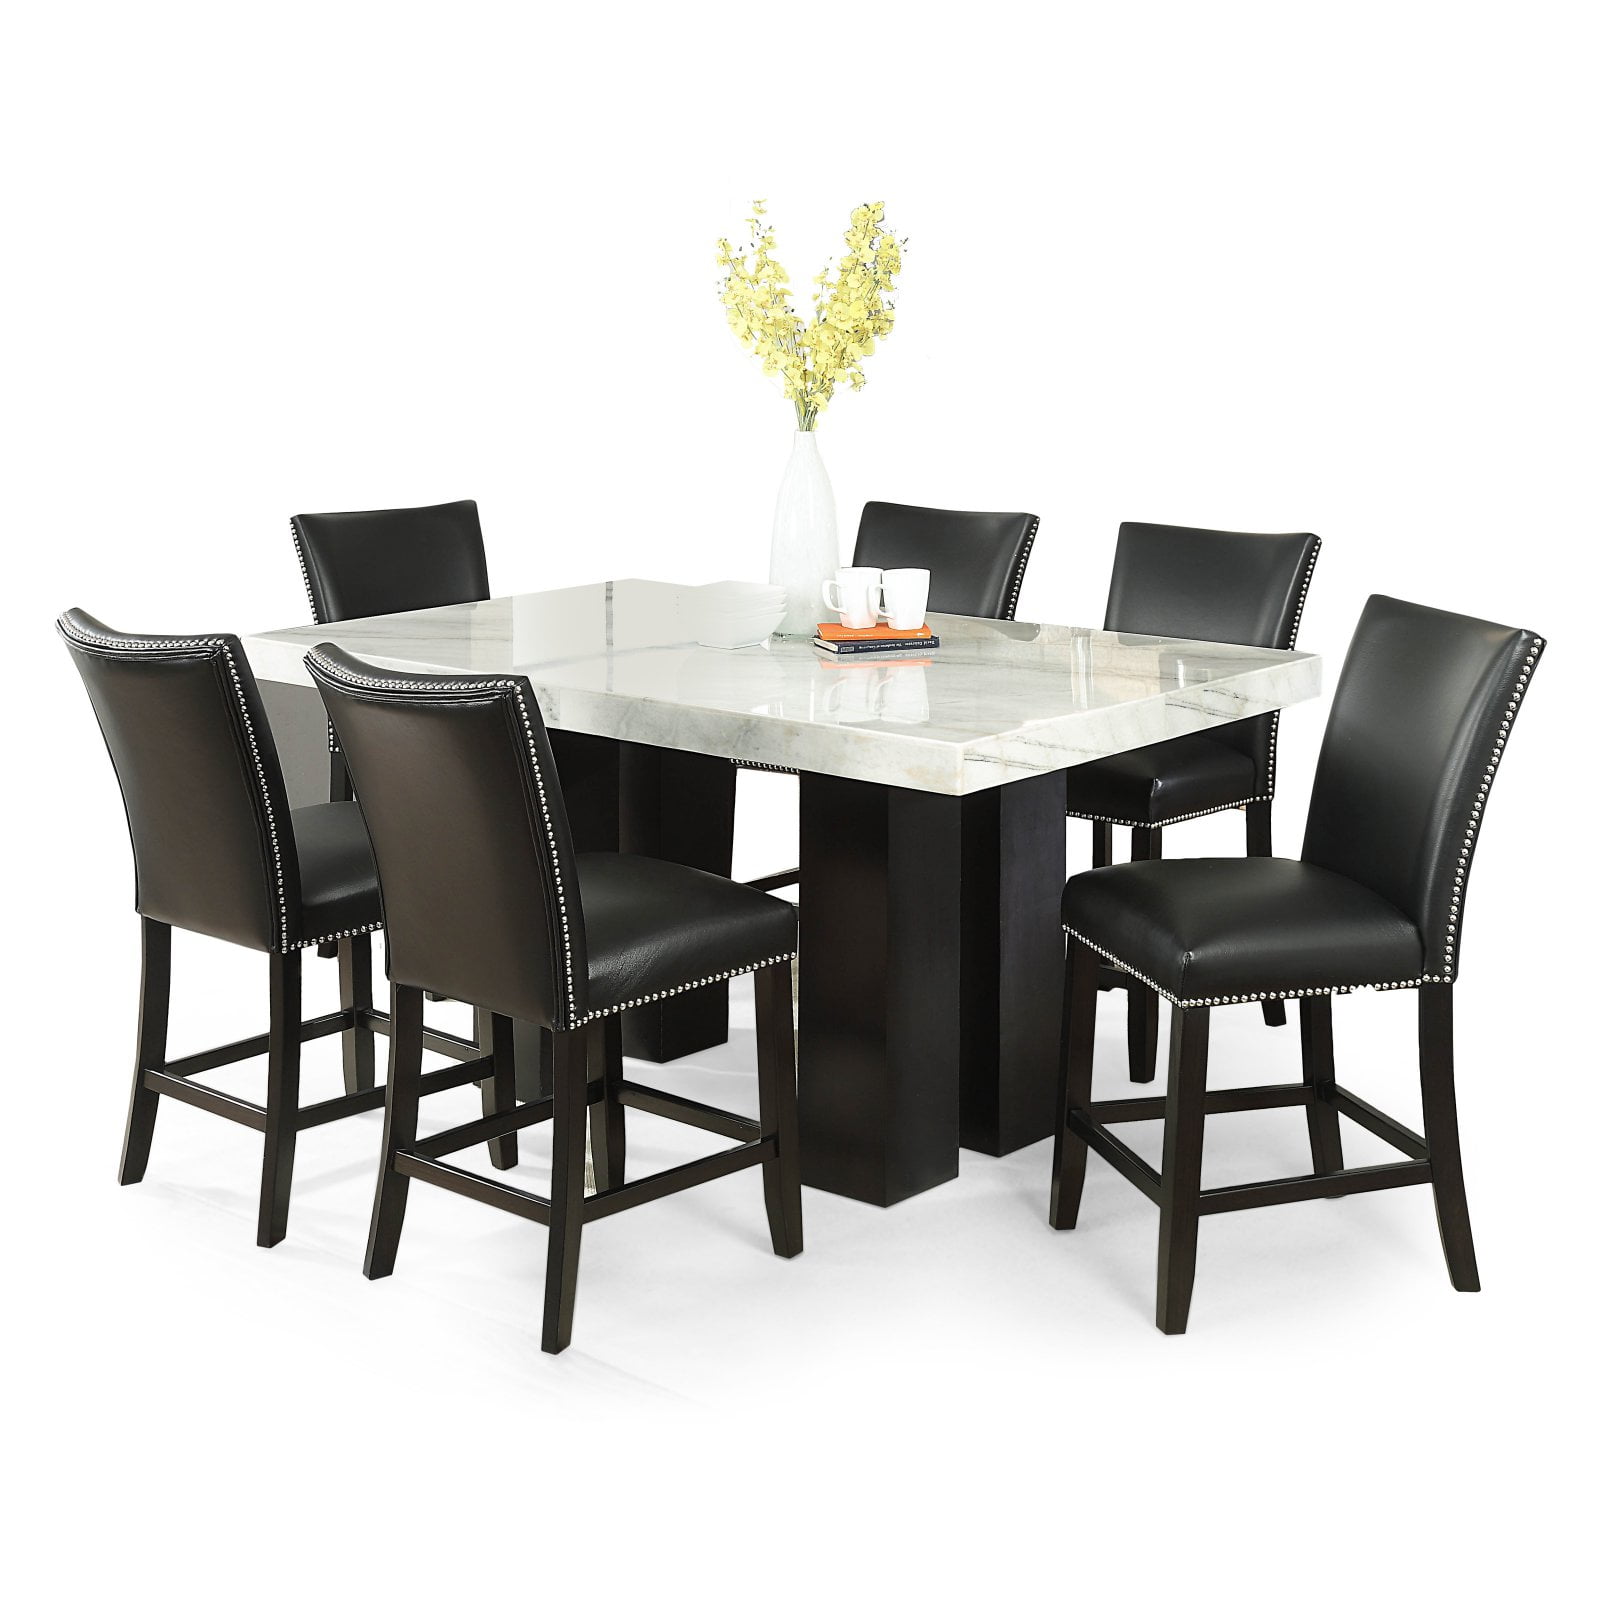 Steve Silver Co Camila Rectangle 7, Value City Dining Room Tables